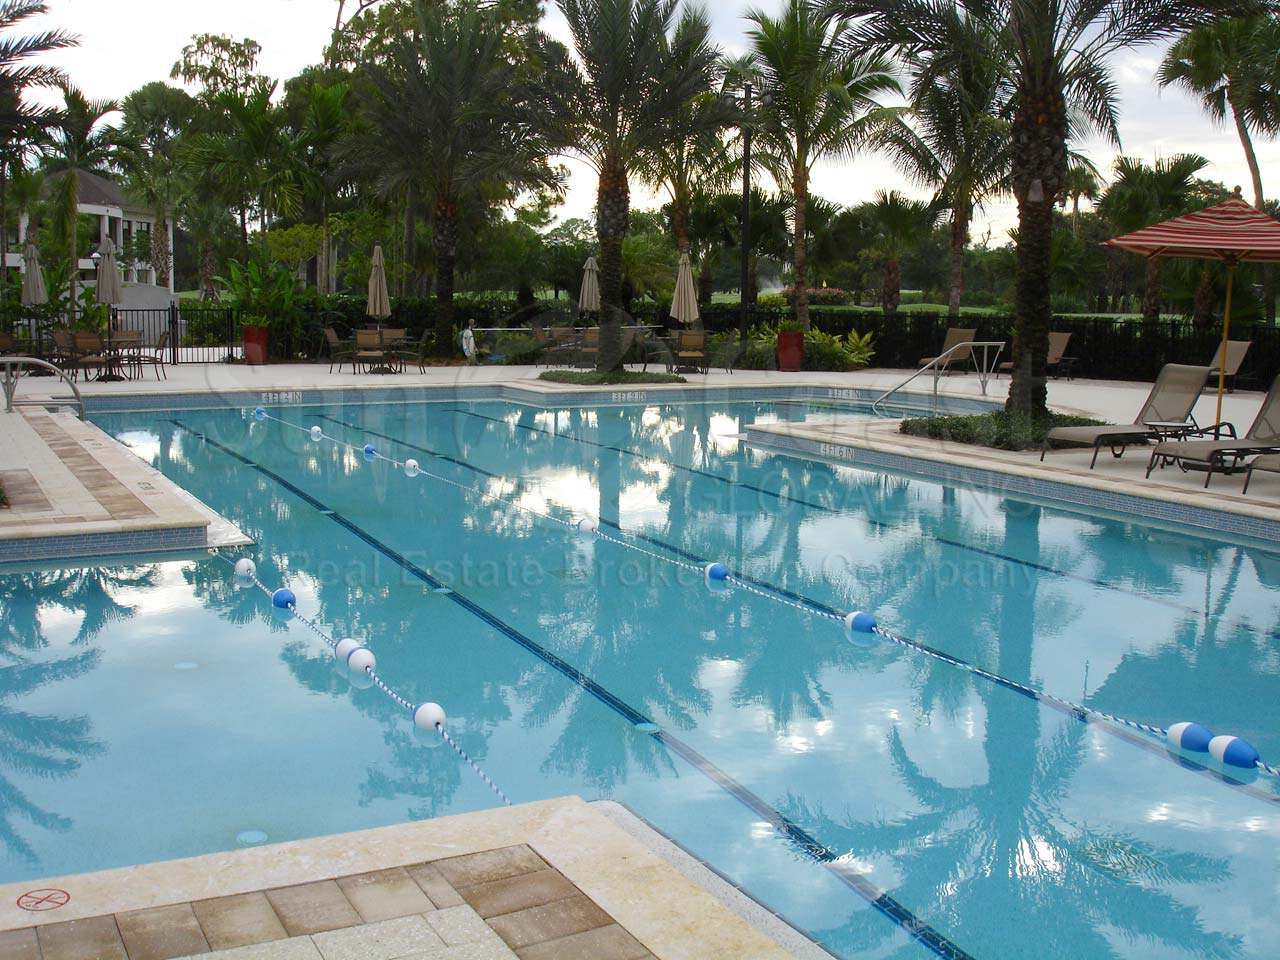 WYNDEMERE Golf and Country Club pool area